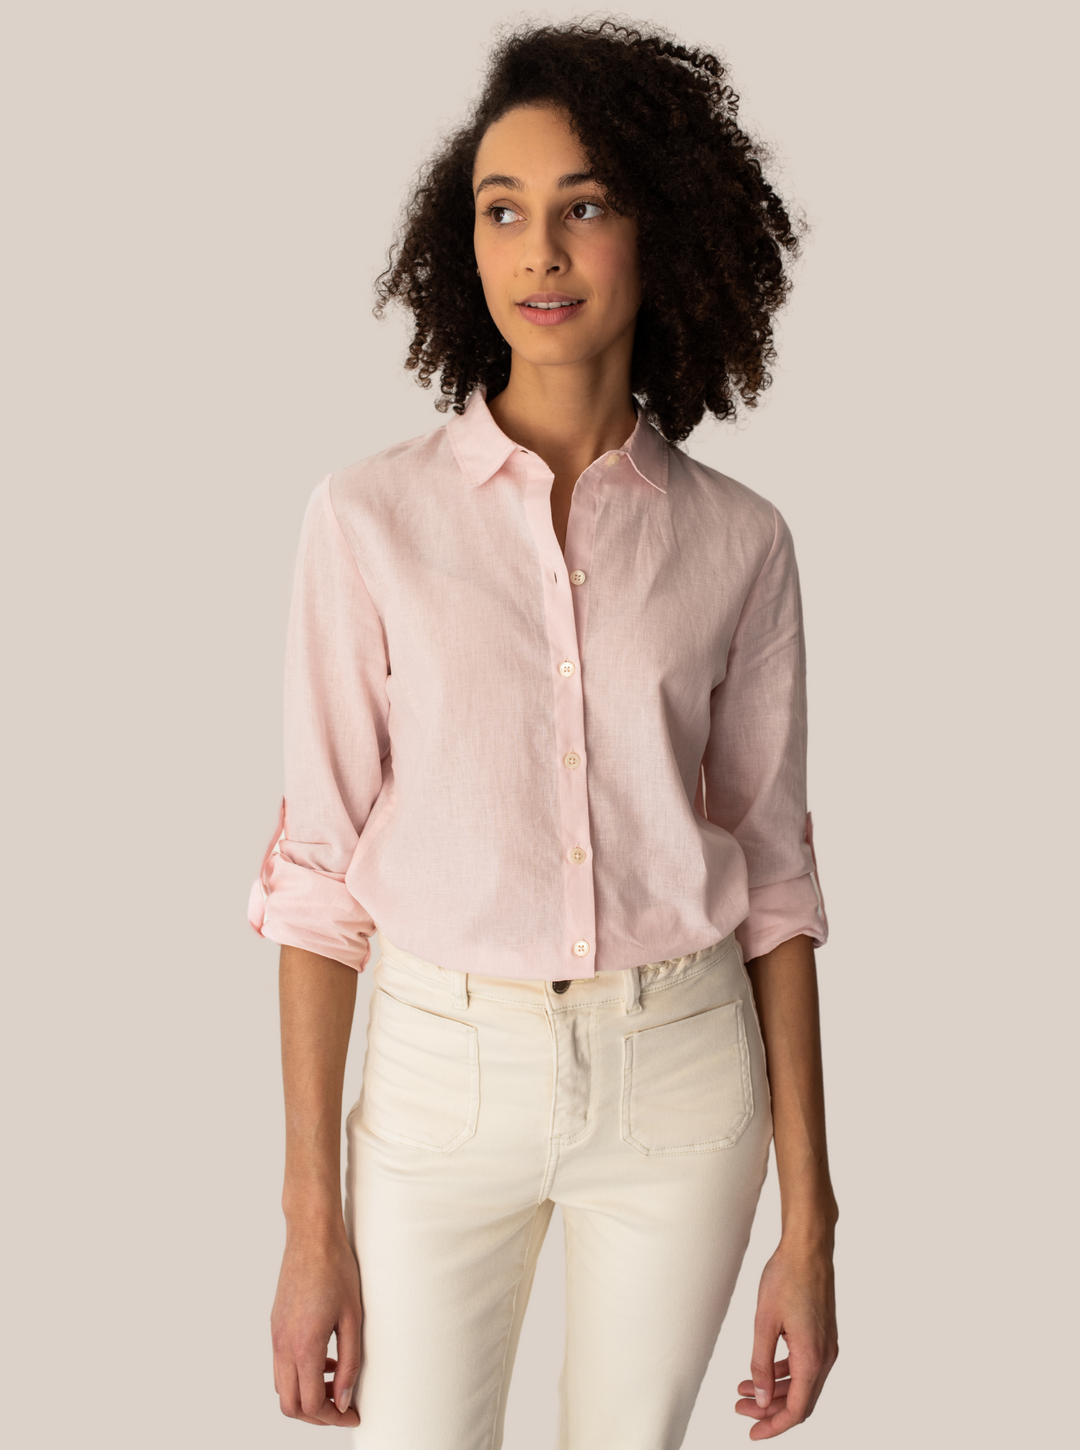 Model with fitted linen blouse in peach colour